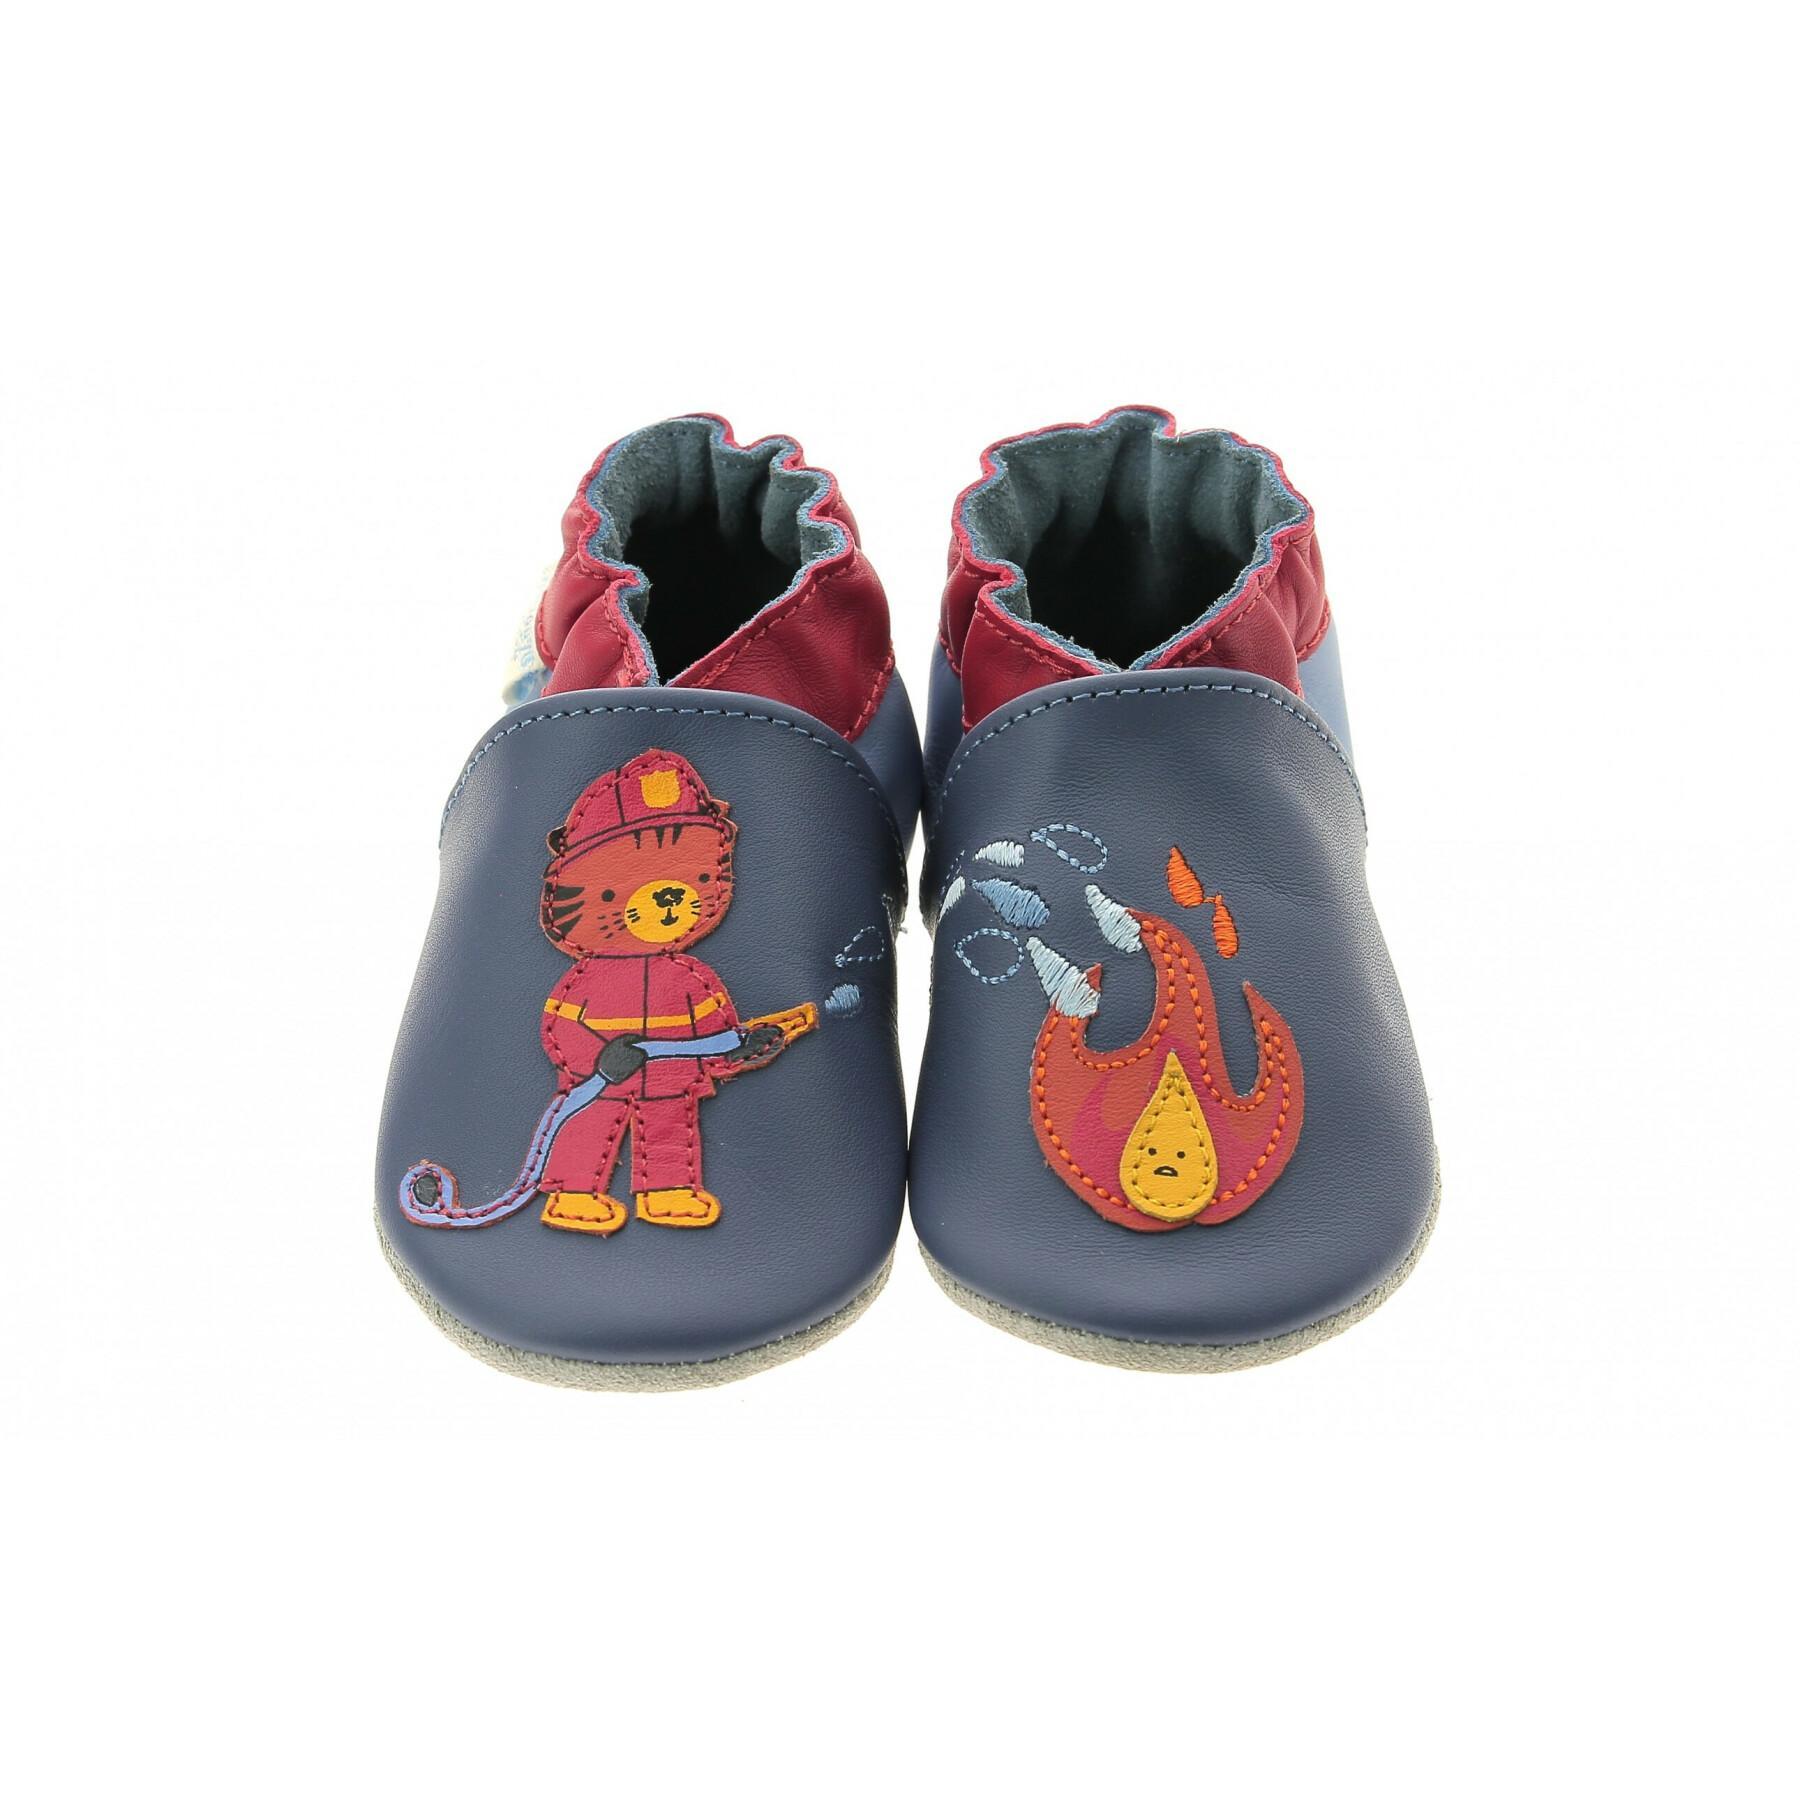 Baby boy shoes Robeez Fire Control